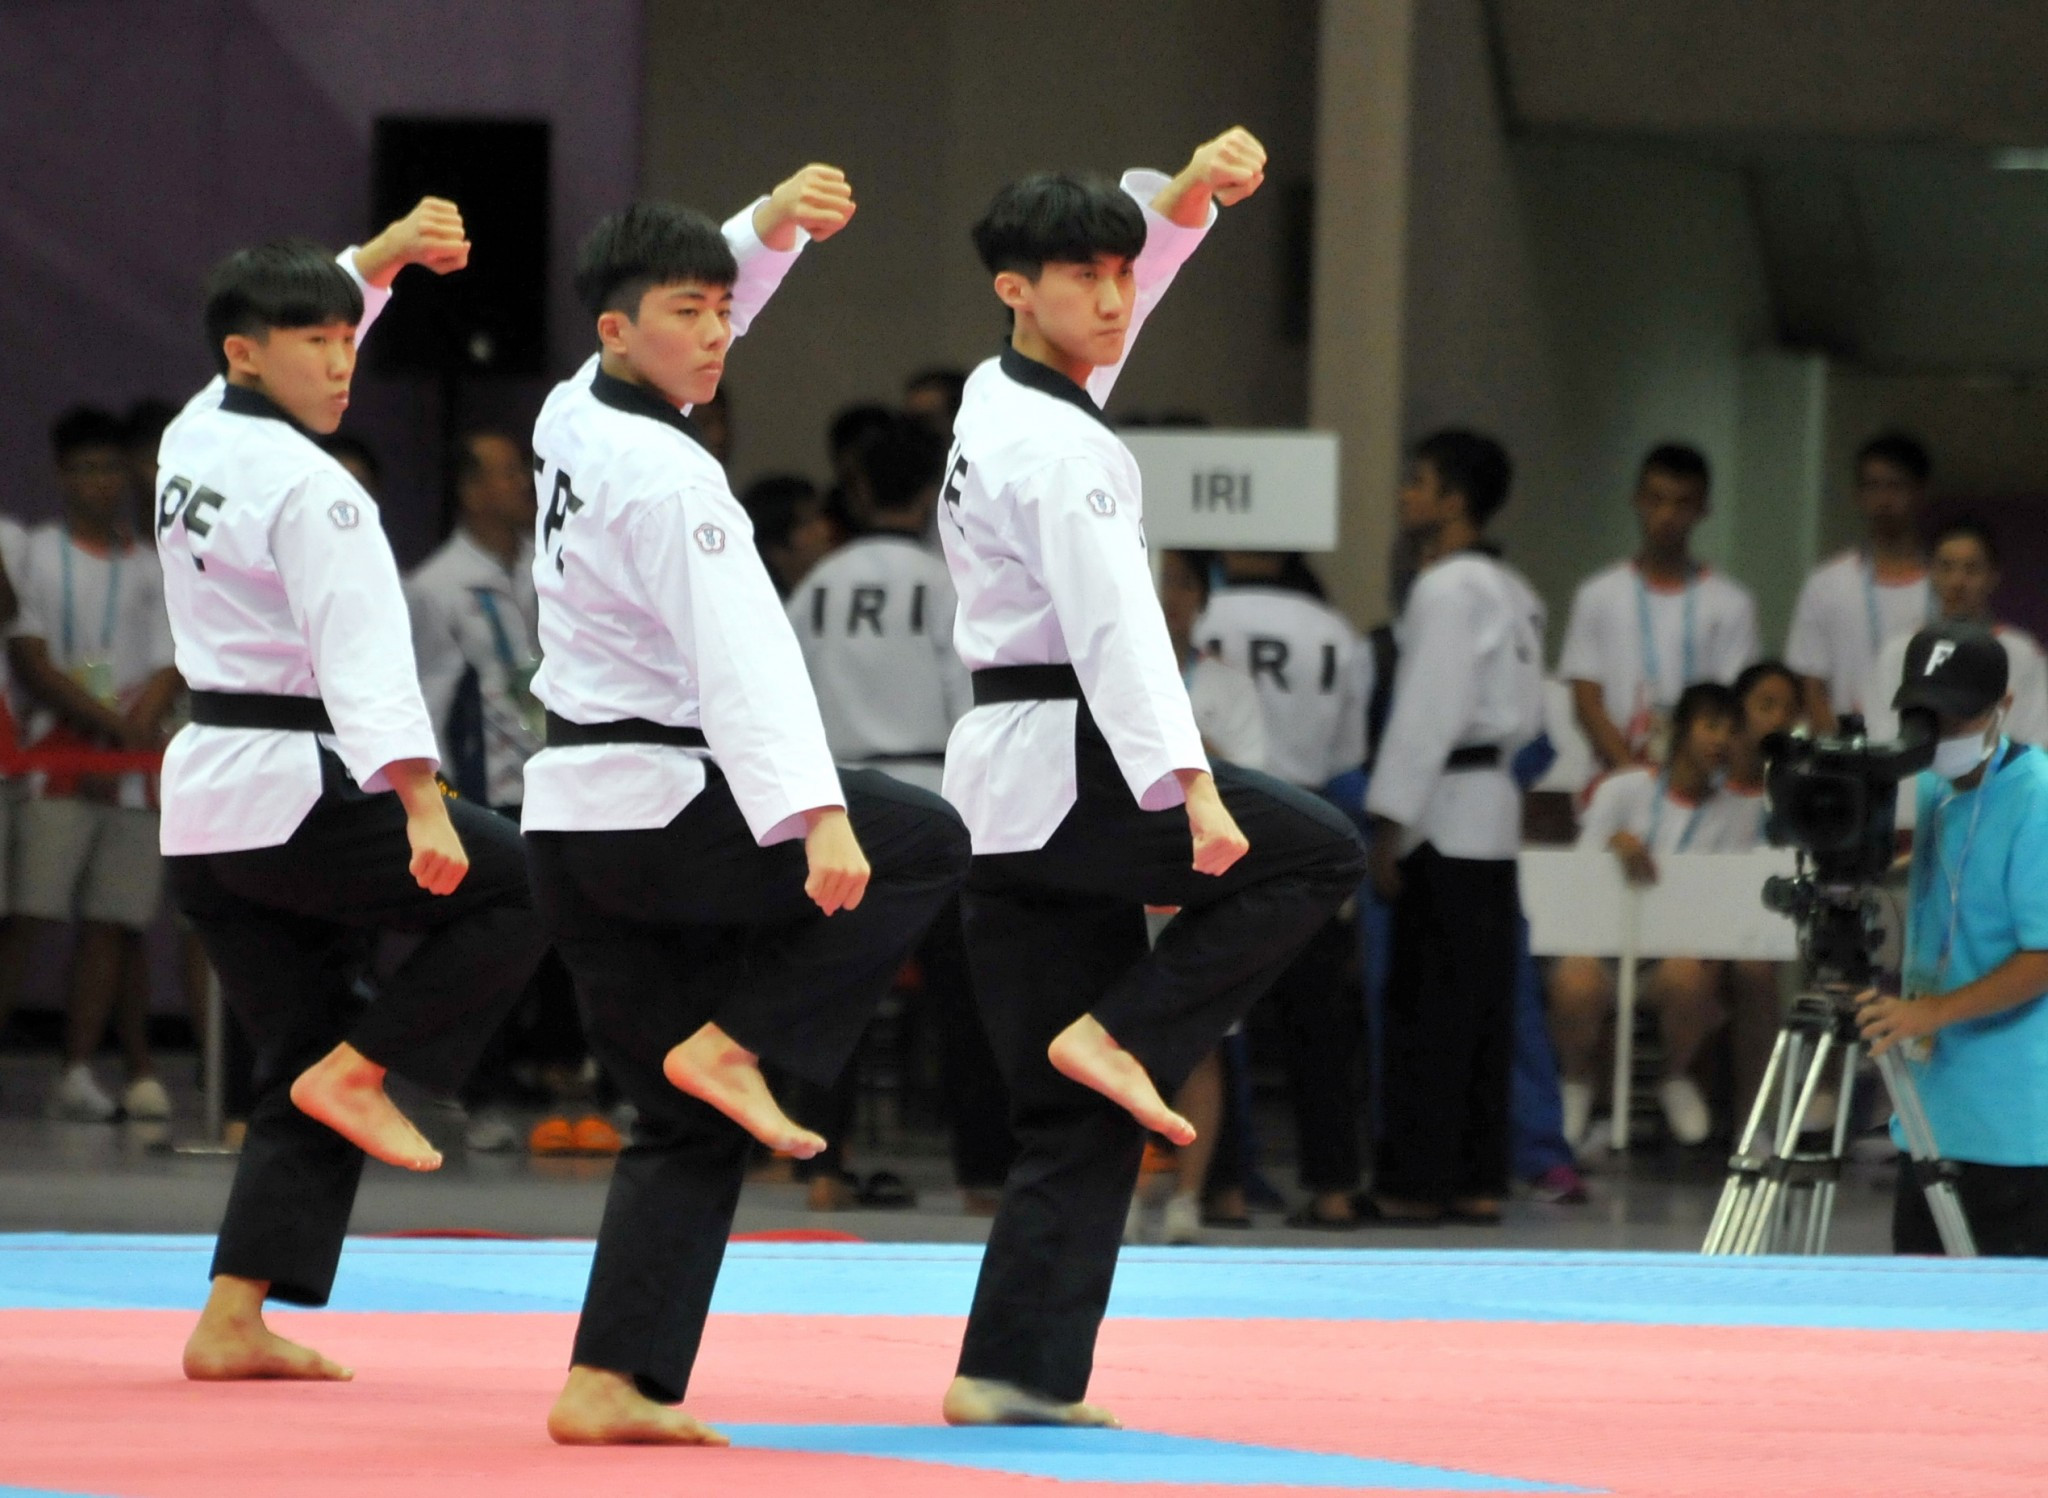 Four poomsae events will be competed in at the Pan American Games ©Getty Images